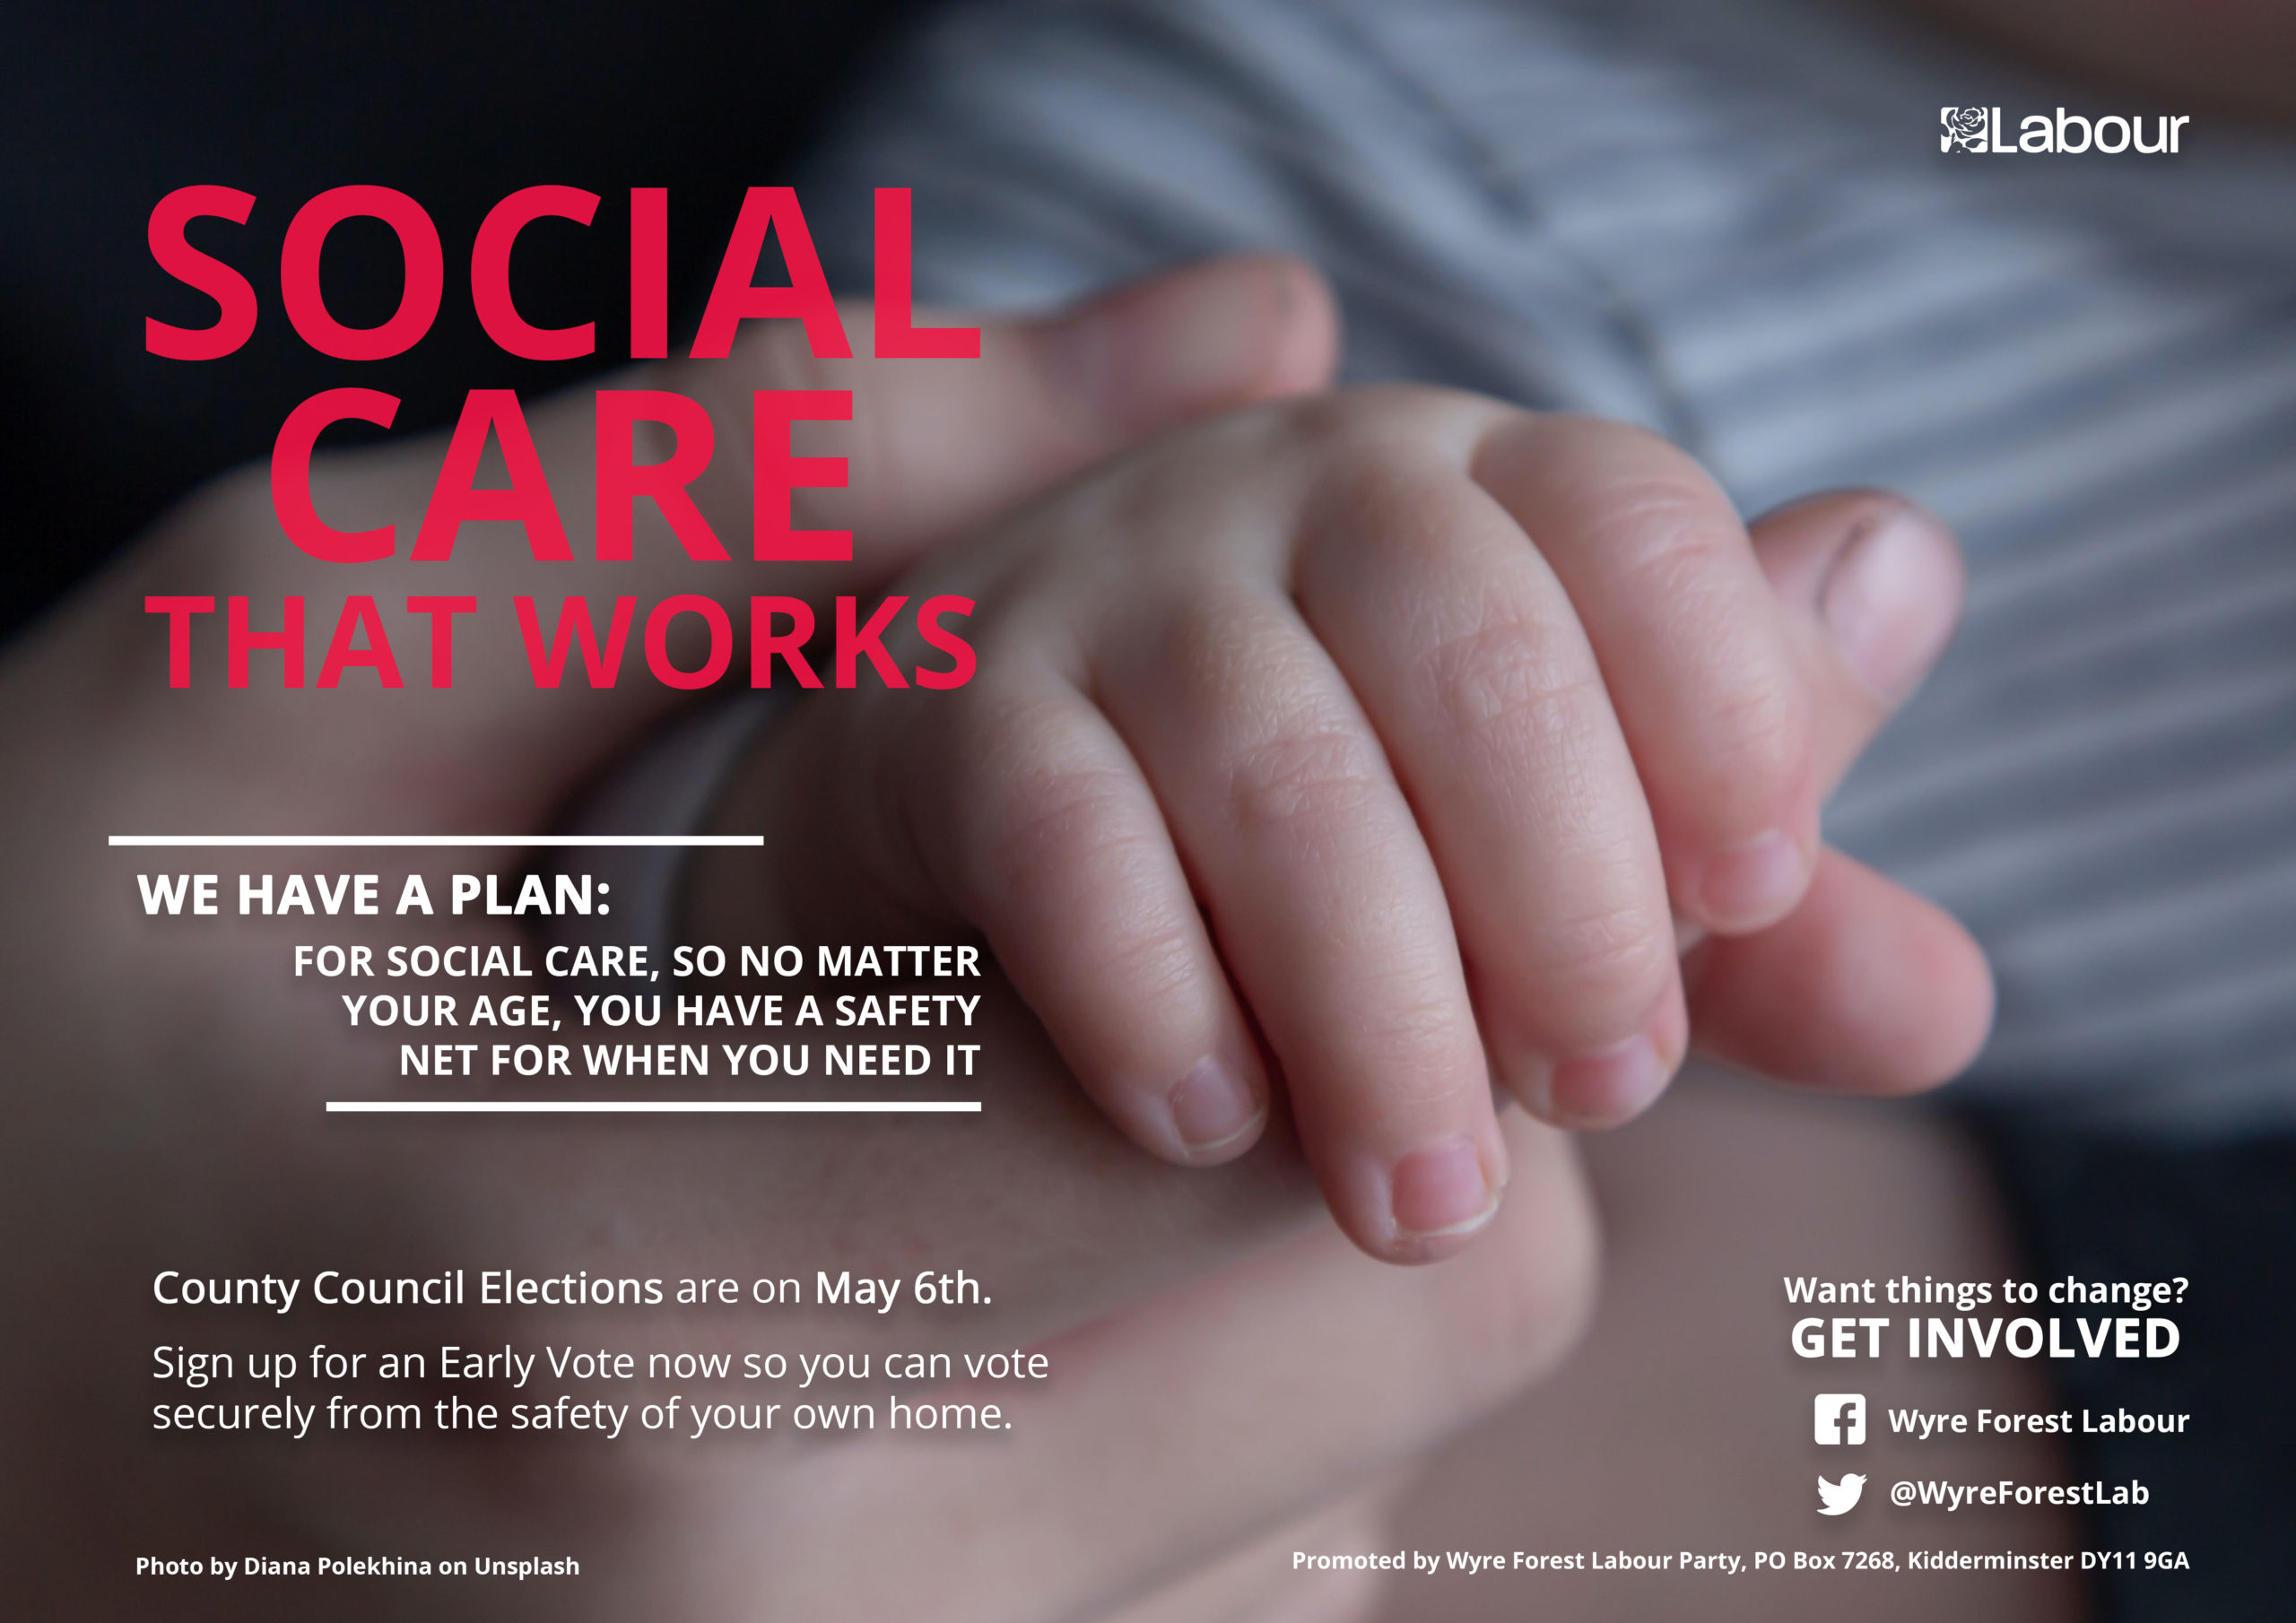 Social Care that Works: We have a plan for social care, so no matter your age, you have a safety net for when you need it